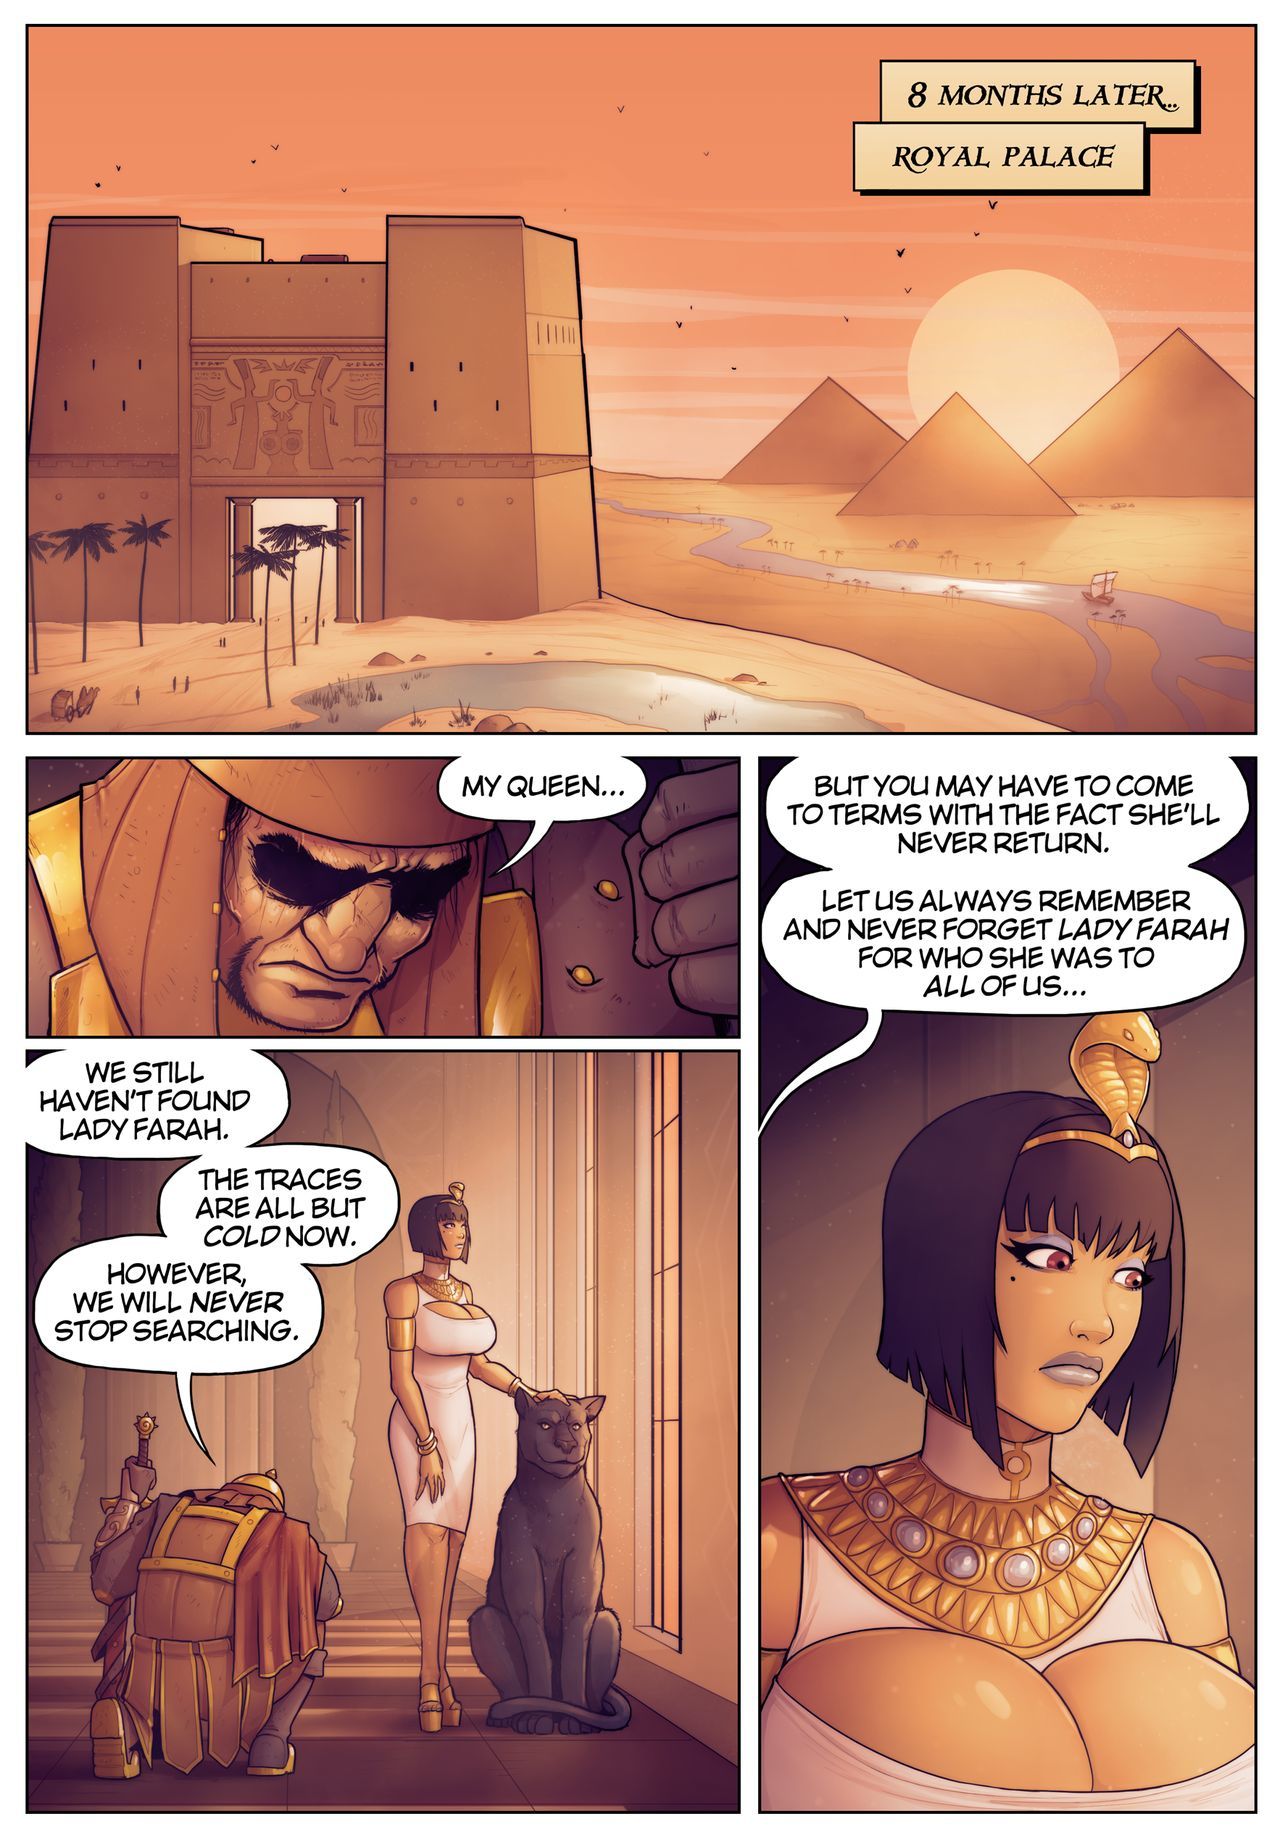 Legend of Queen Opala -Tales of Pharah: In the Shadow of Anubis* page 1